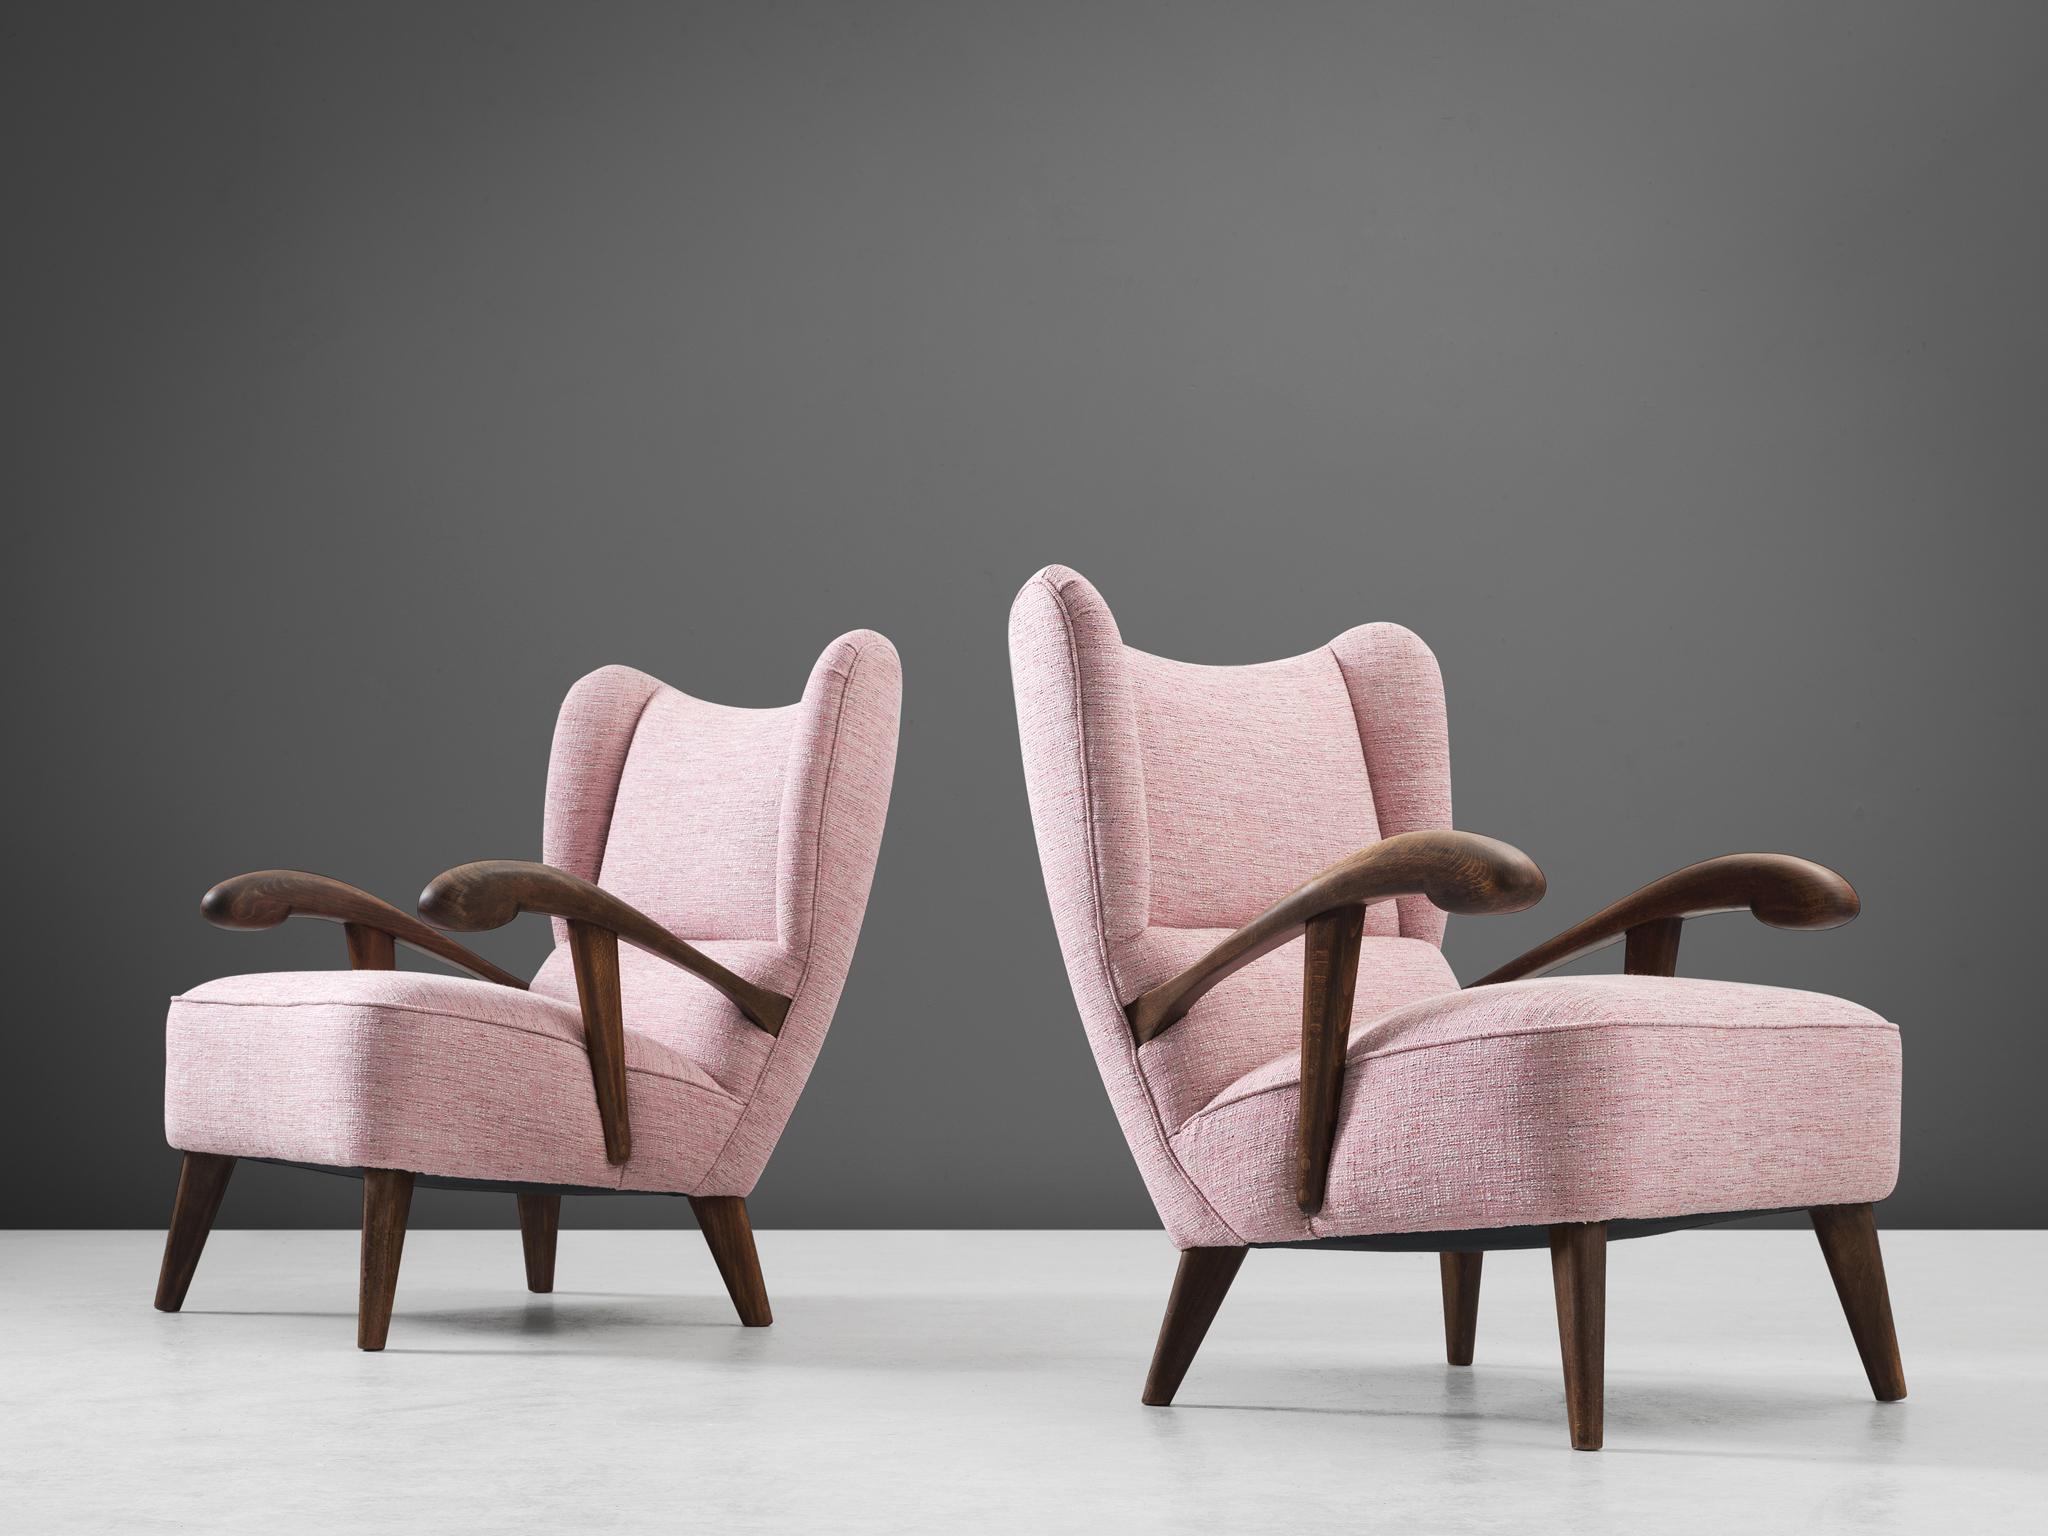 Pair of lounge chairs, stained beech, fabric, Czech Republic, 1950s. 

This beautifully designed lounge chair holds a striking construction by means of the sculpted elements discernible in the wooden frame and back. The armrests are characterized by